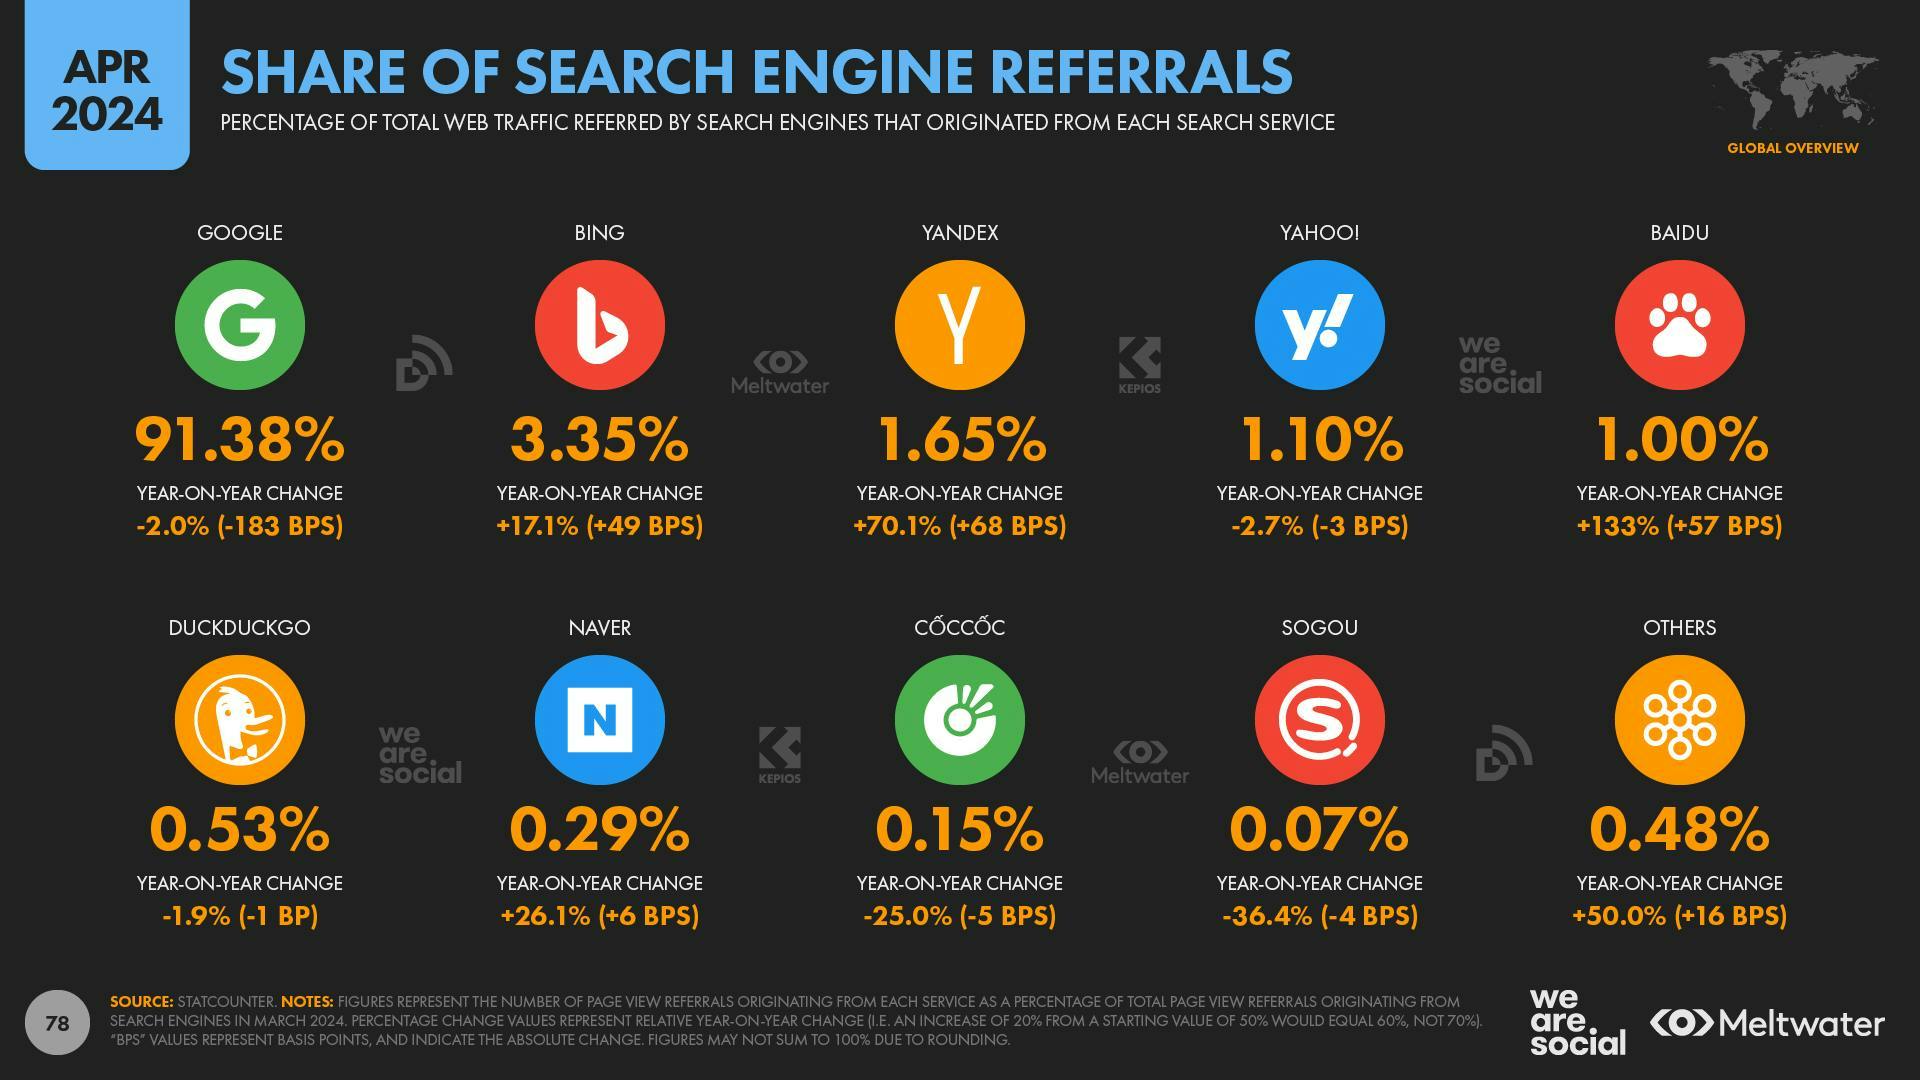 Share of search engine referrals